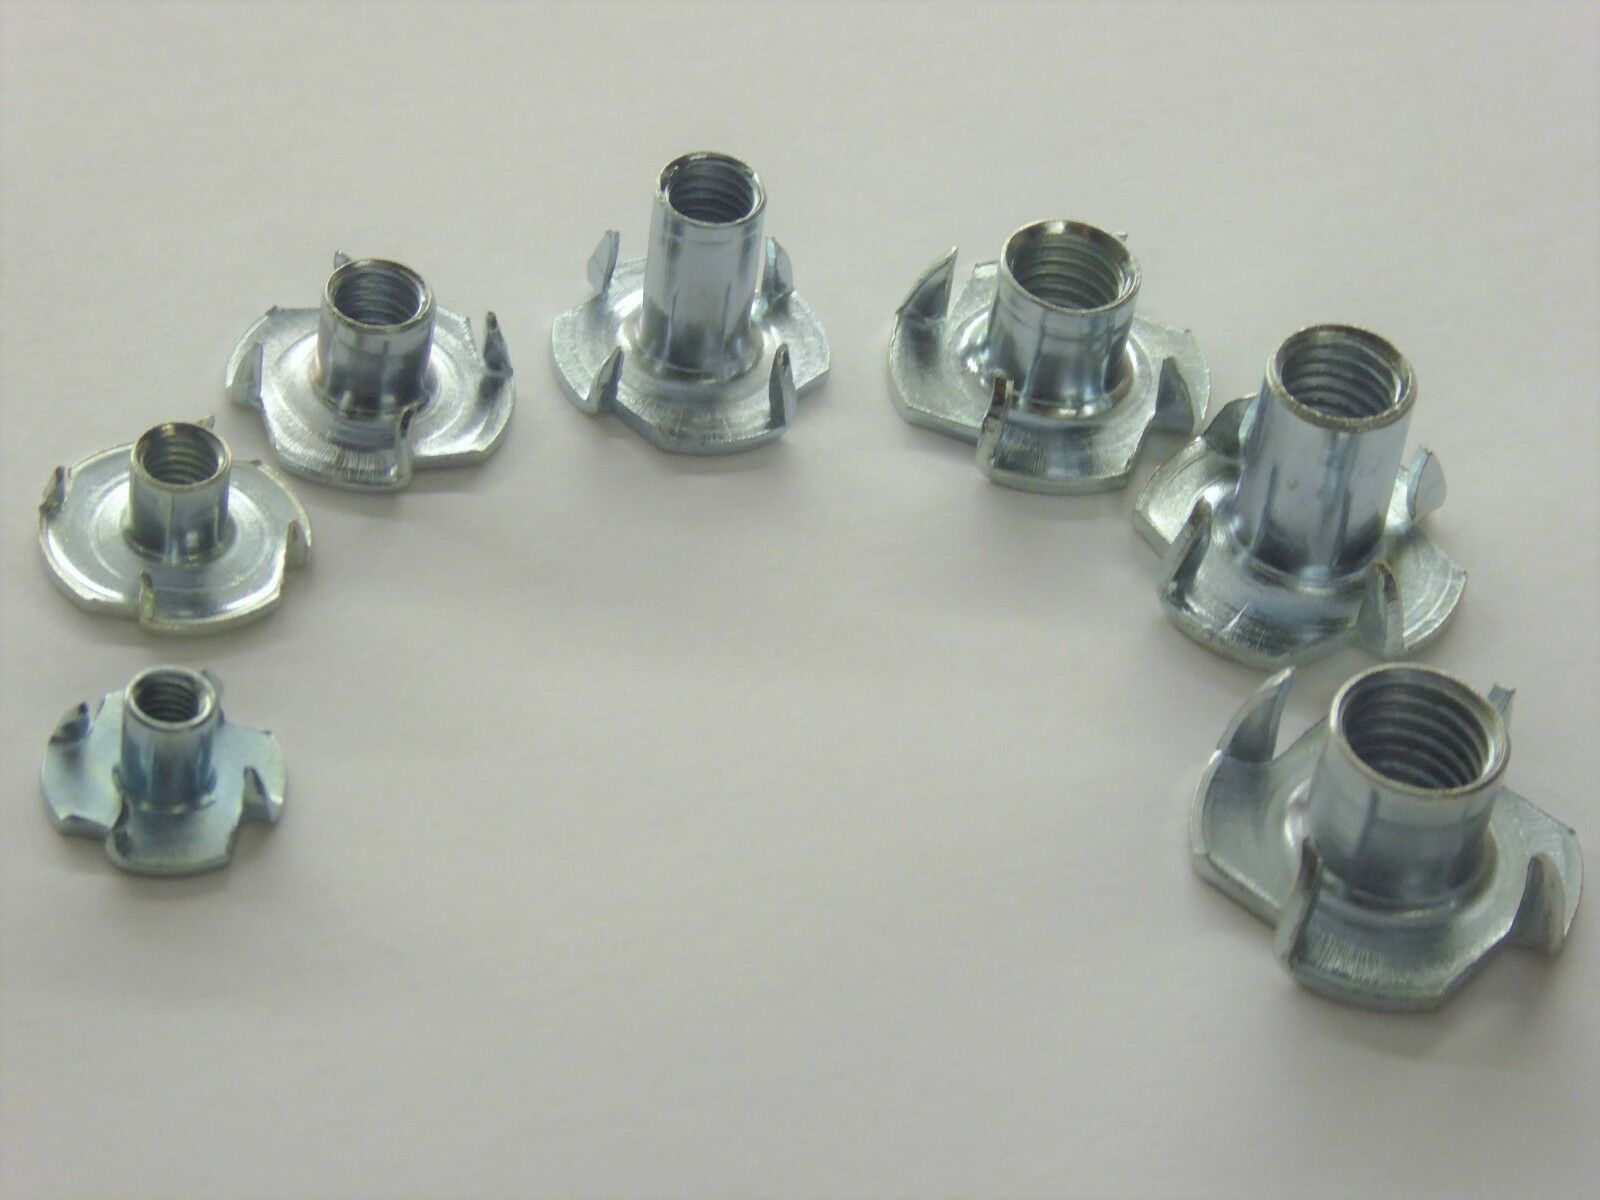 4 Prong T-Nut M4 M5 M6 M8 M10 Tee Blind Nuts Zinc Plated Used For Wood Furniture 